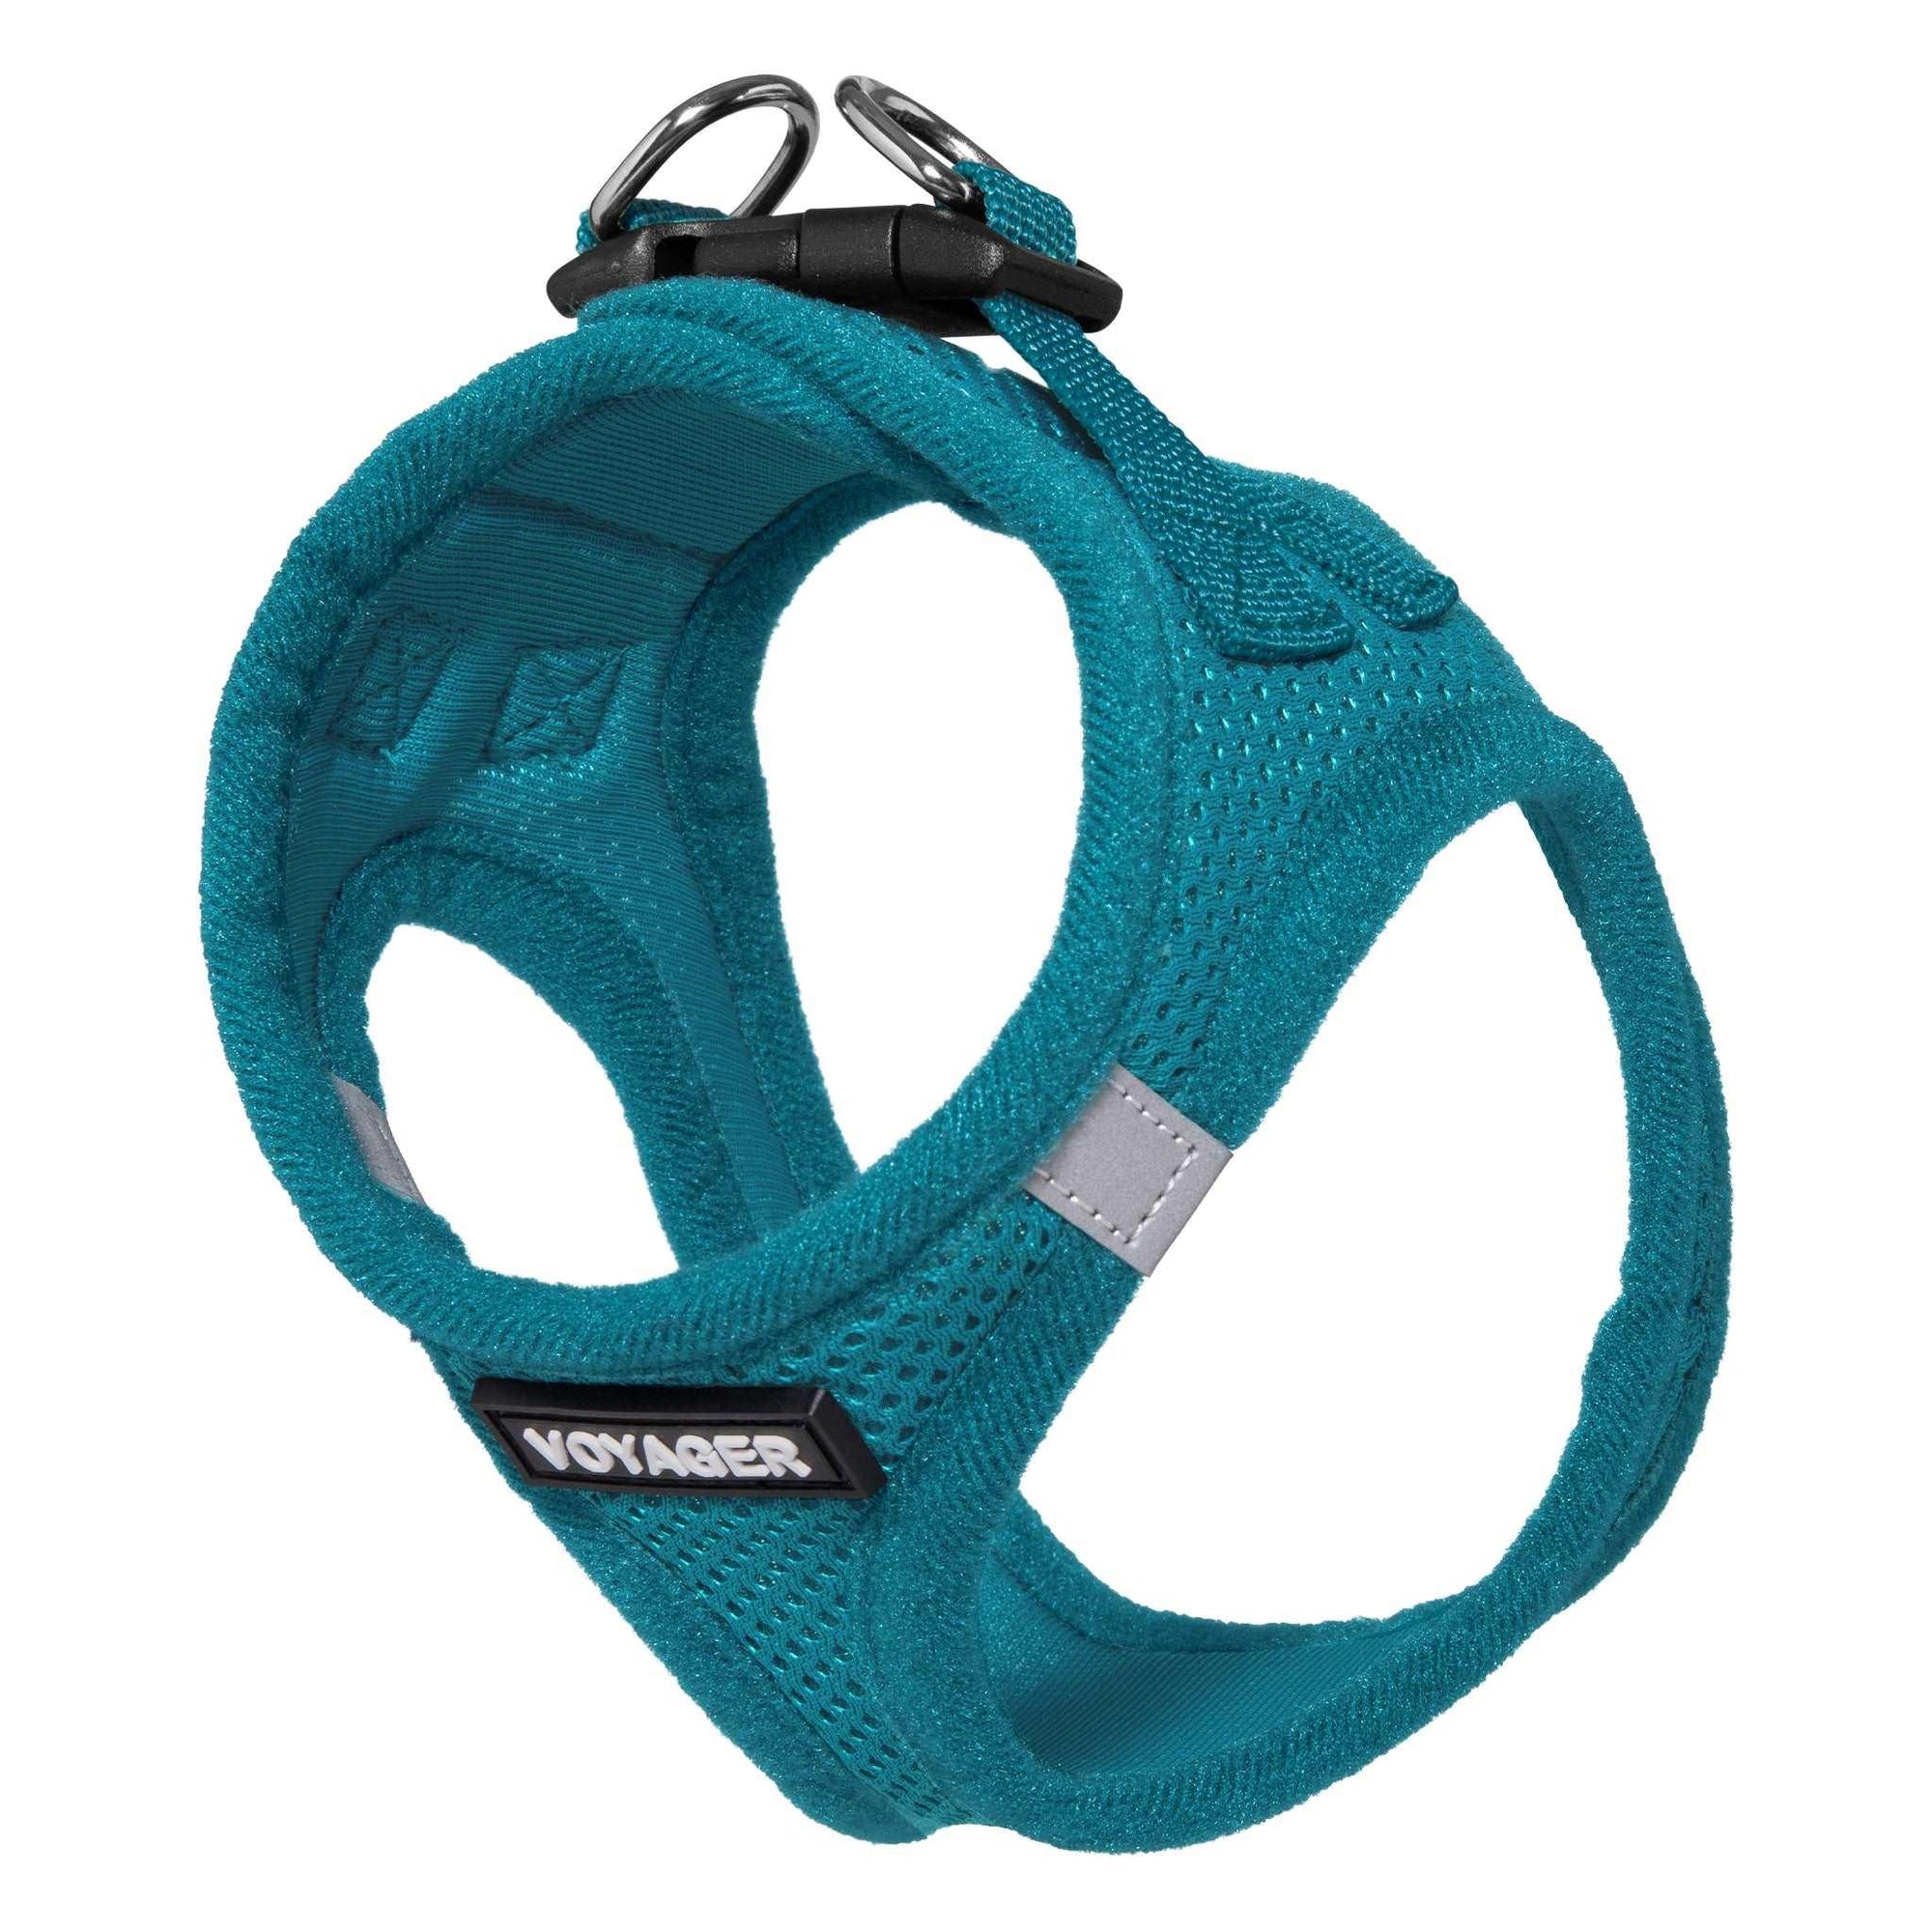 VOYAGER Step-In Air Pet Harness in Turquoise with Matching Trim and Webbing - Expanded